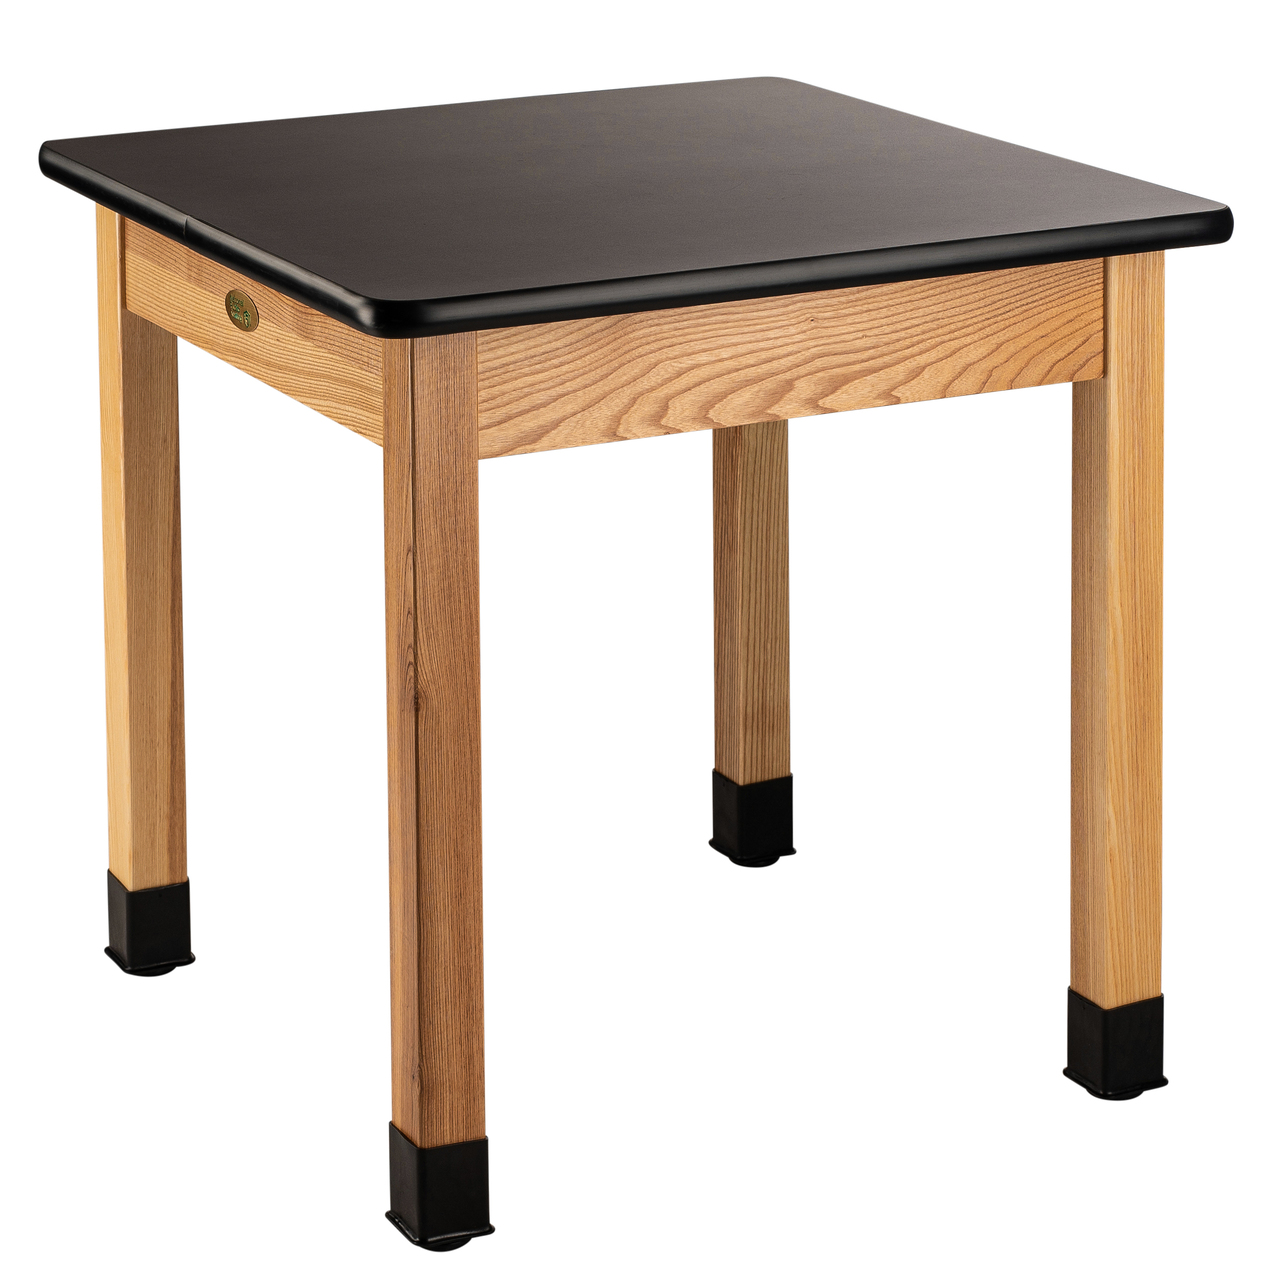 NPS Wood Science Lab Table -  30"x30"x36" -  HPL Top - Black Top and Ash Leg